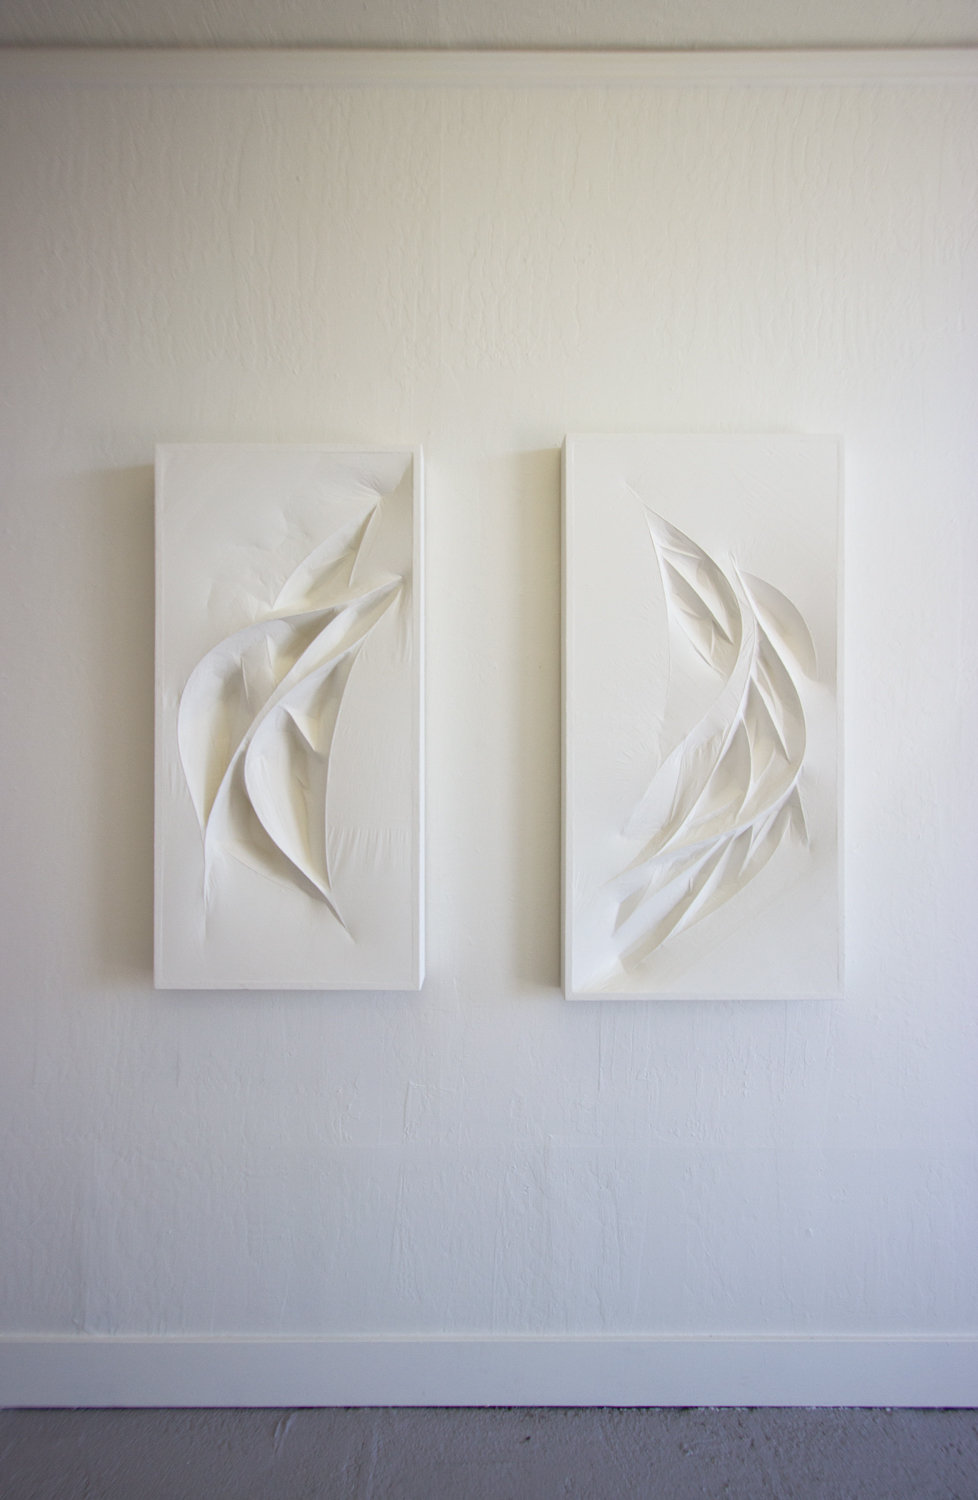  Untitled 1 &amp; 2 (white forms)  2015  Wood panel, wood forms, and paper mache (white tracing paper with gallery white paint)  45 x 23.5 x 4 inches, 47.5 x 23.5 x 3 inches 